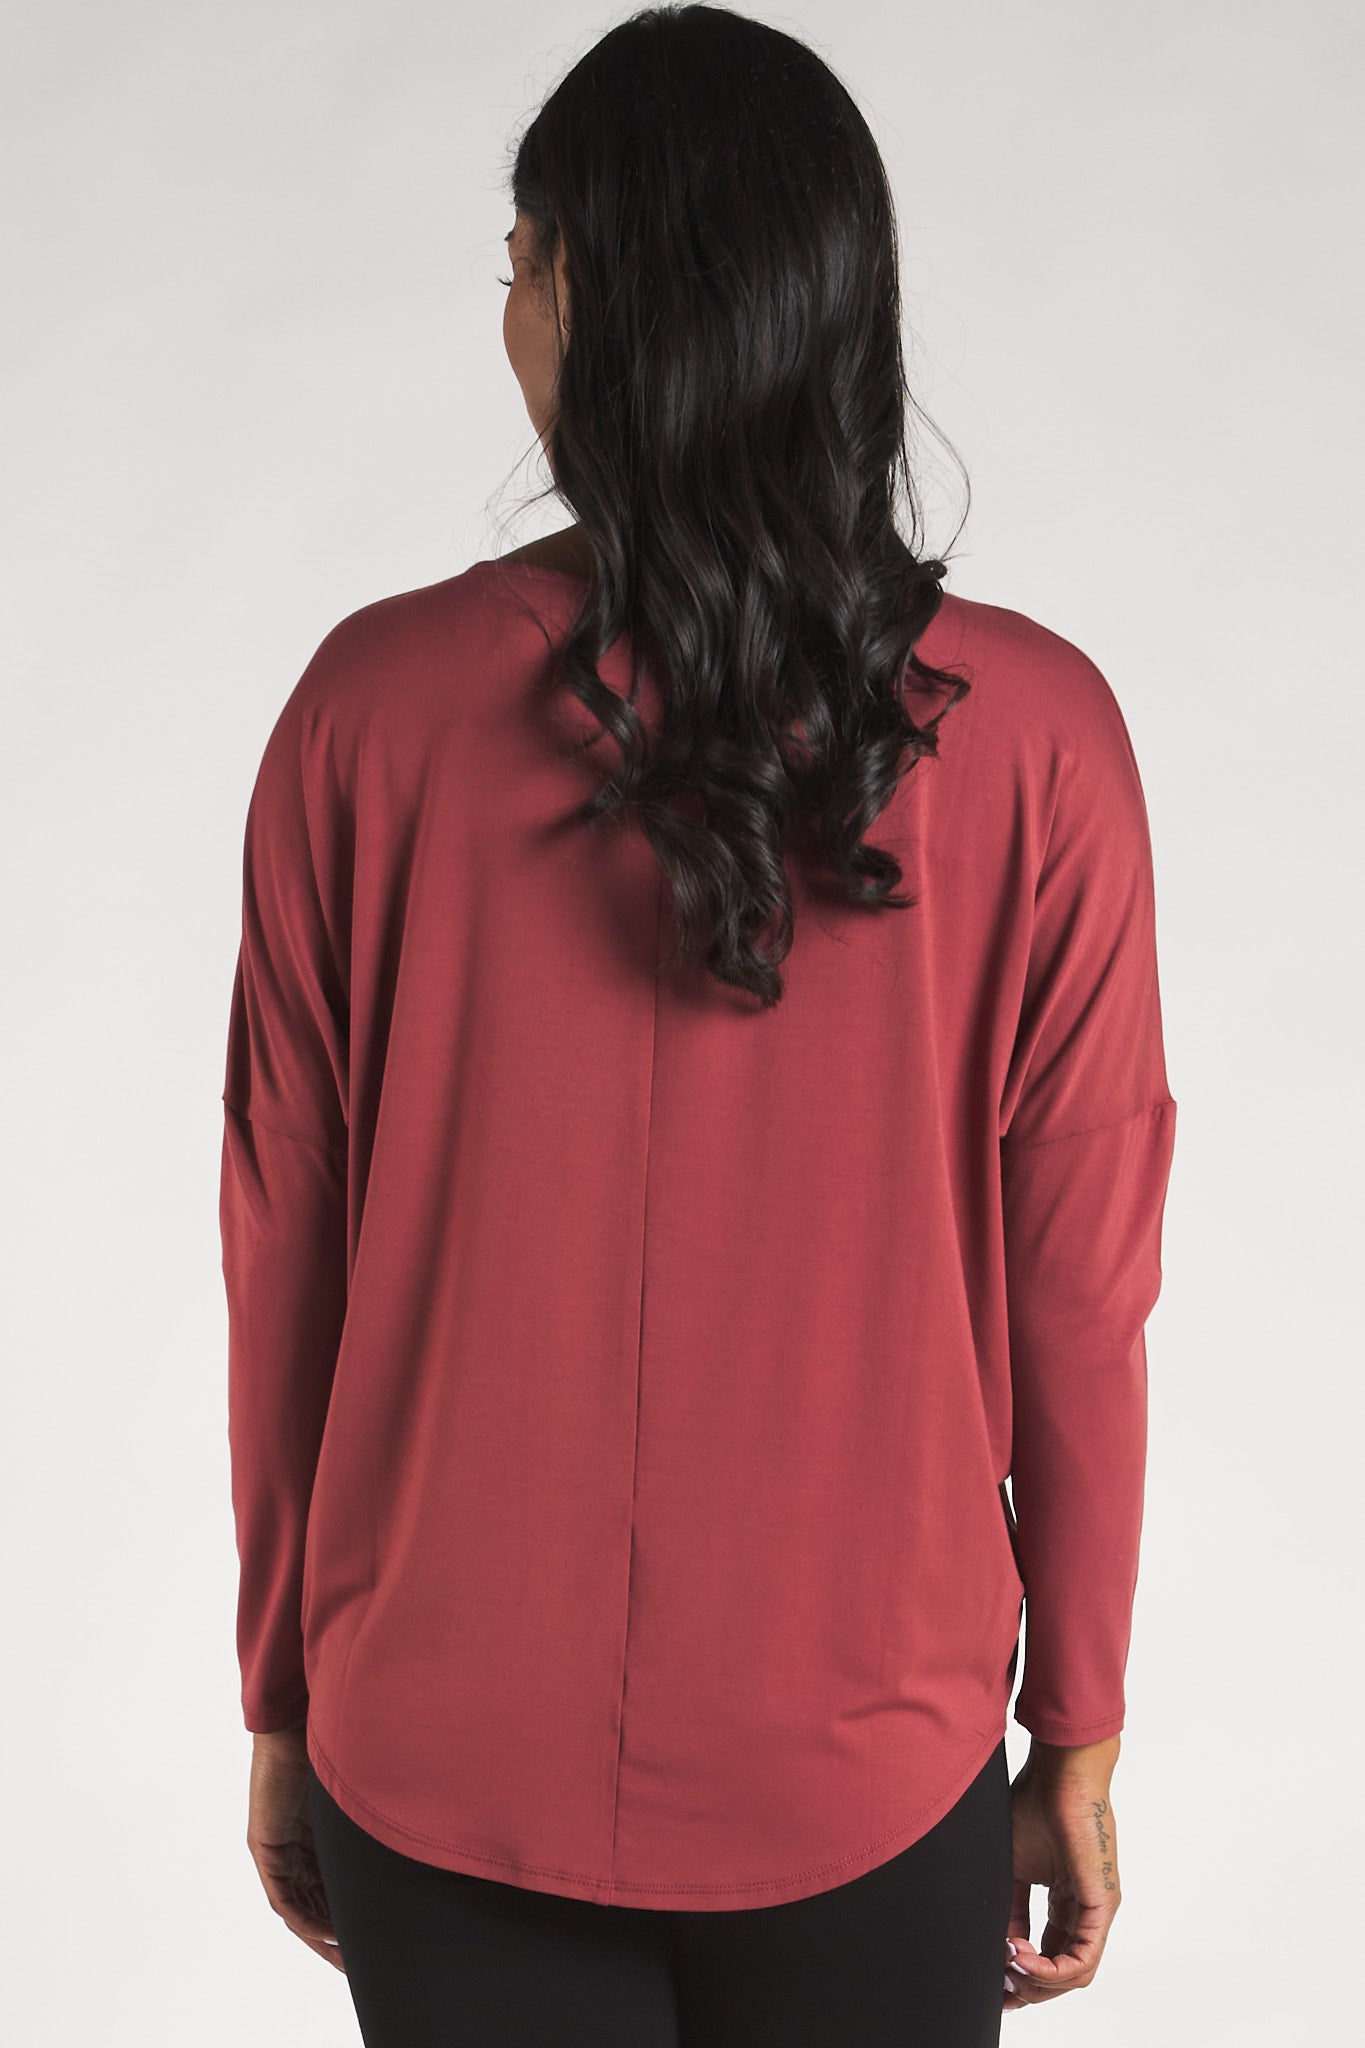 Back view of a woman styling a Rosewood long sleeve top by Terrera.